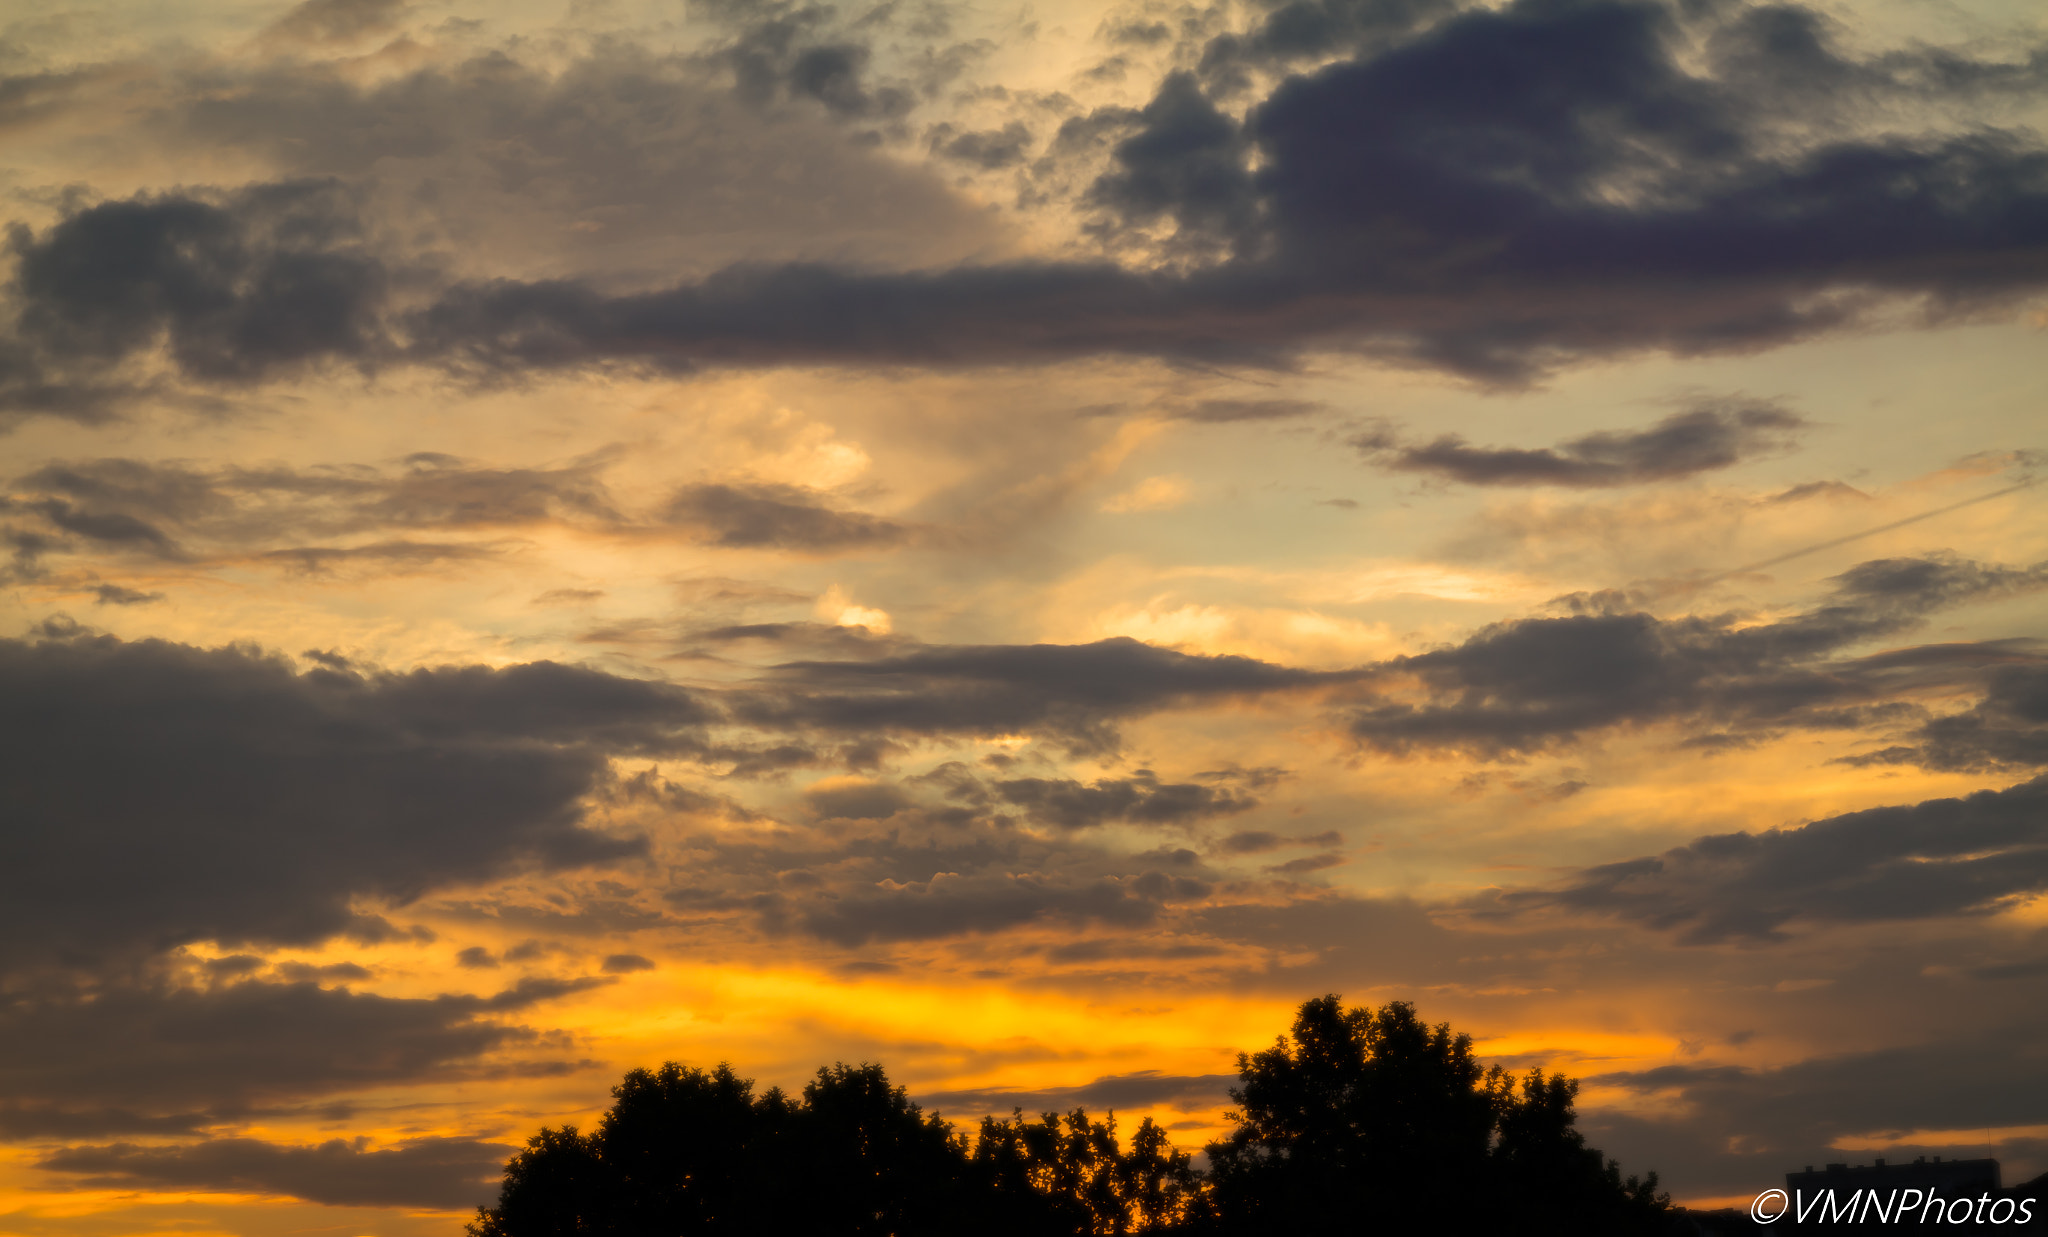 Samsung NX30 sample photo. A sunset from bulgaria photography